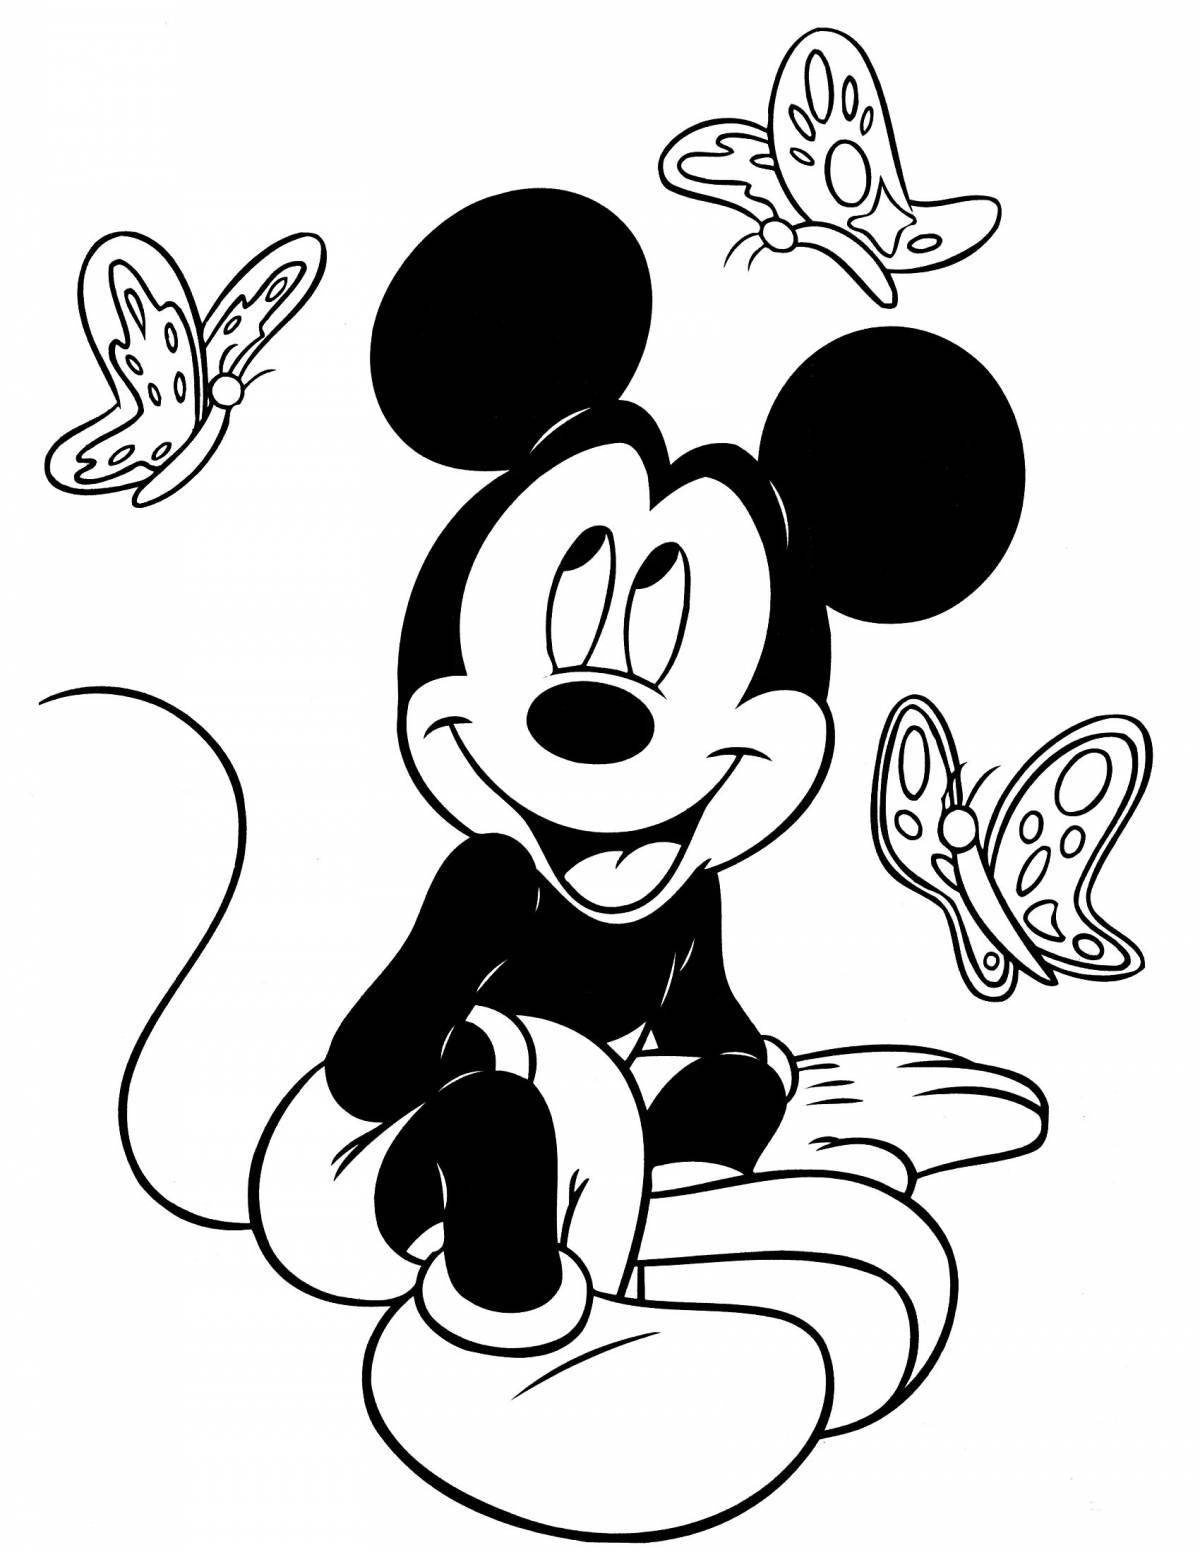 Mickey mouse incredible coloring book